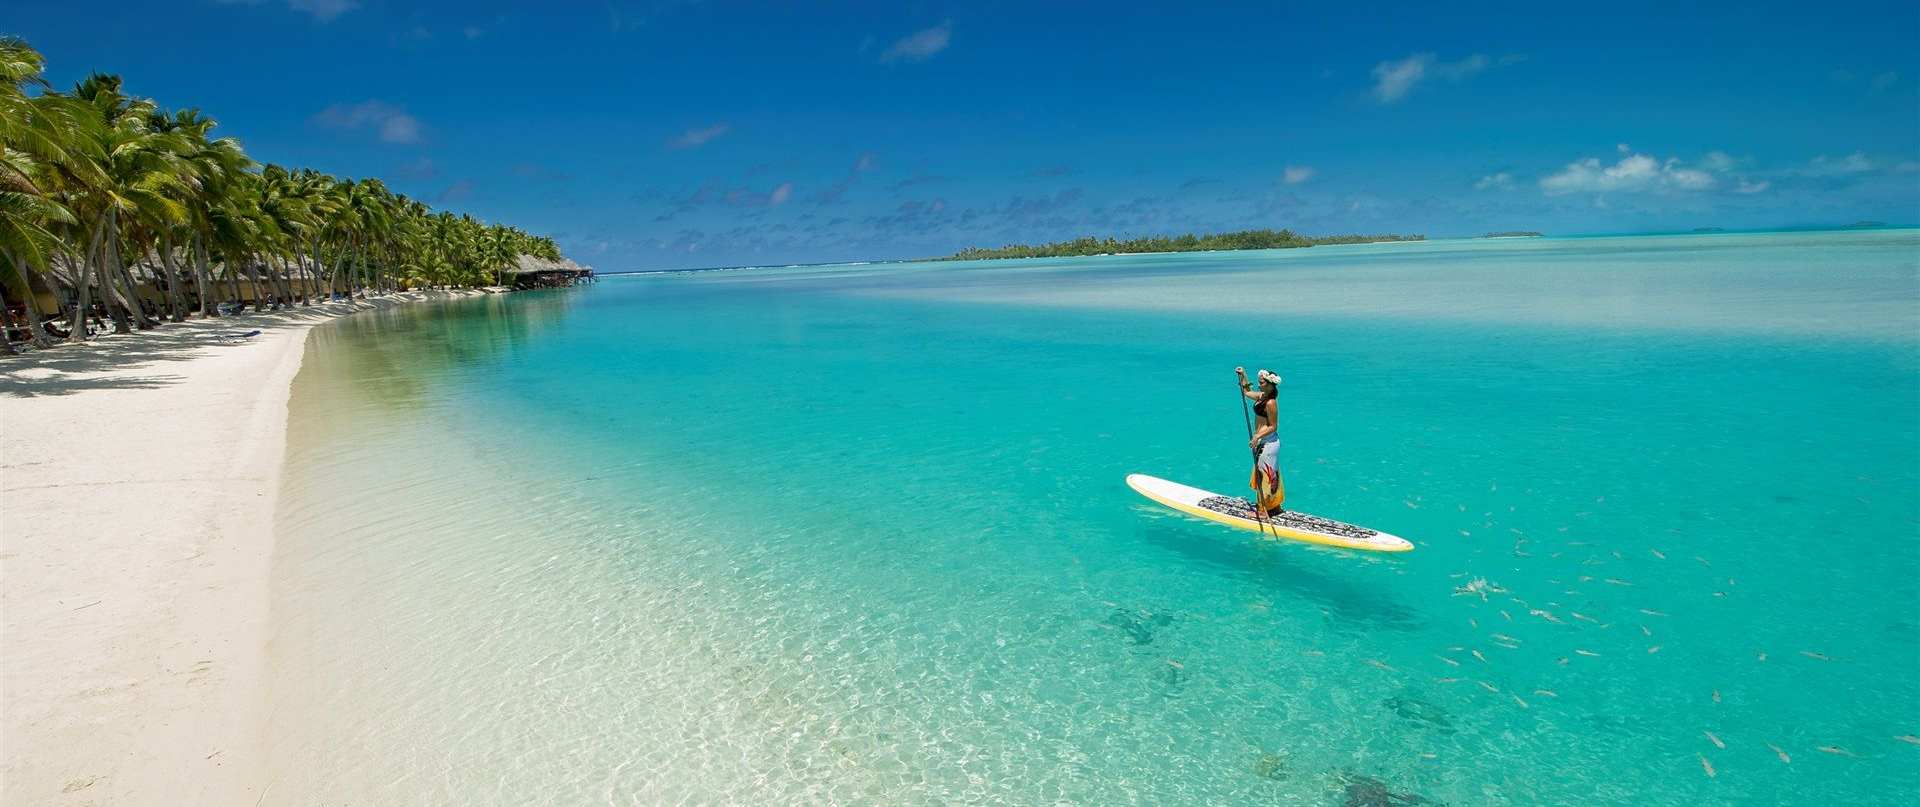 12 Beaches With The Clearest Waters - Via.com Travel Blog